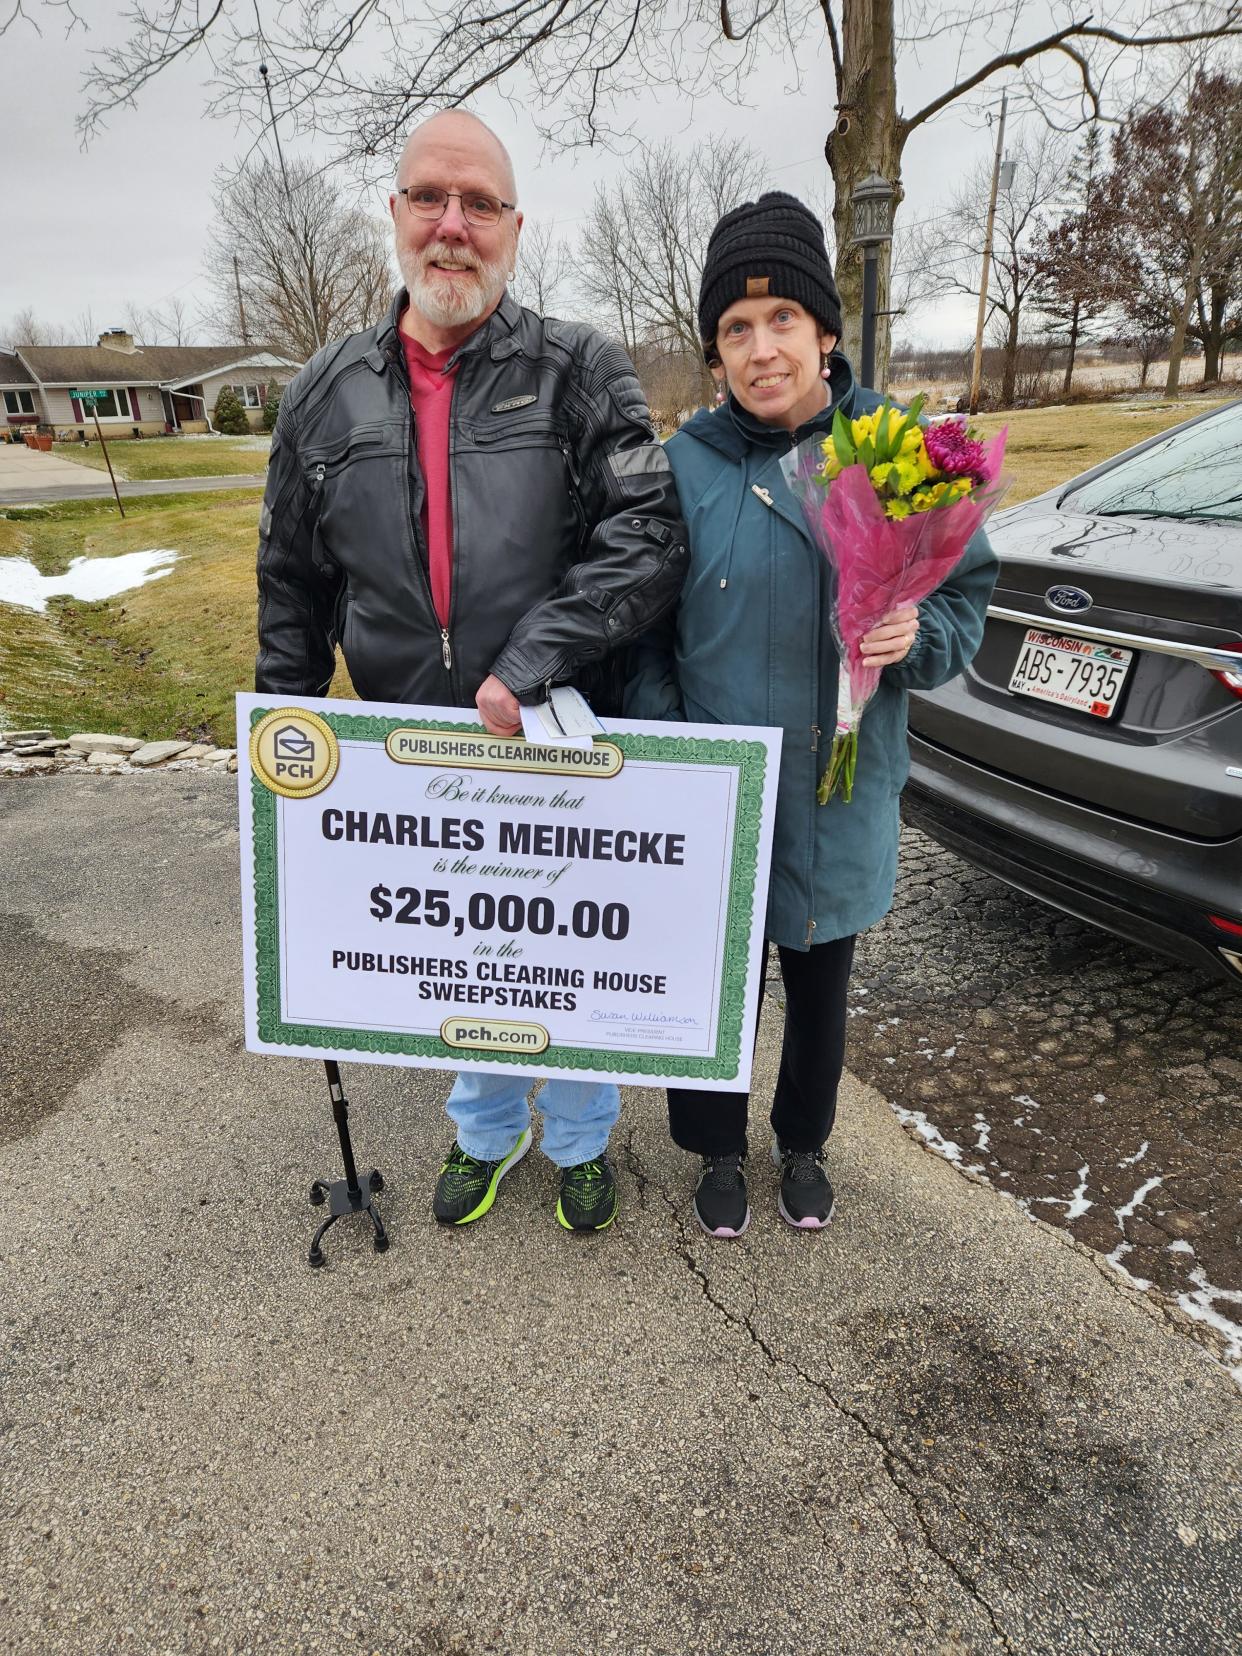 Menomonee Falls resident Charles Meinecke won $25,000 for entering the Publishers Clearing House Sweepstakes. He personally received a check on Jan. 6.